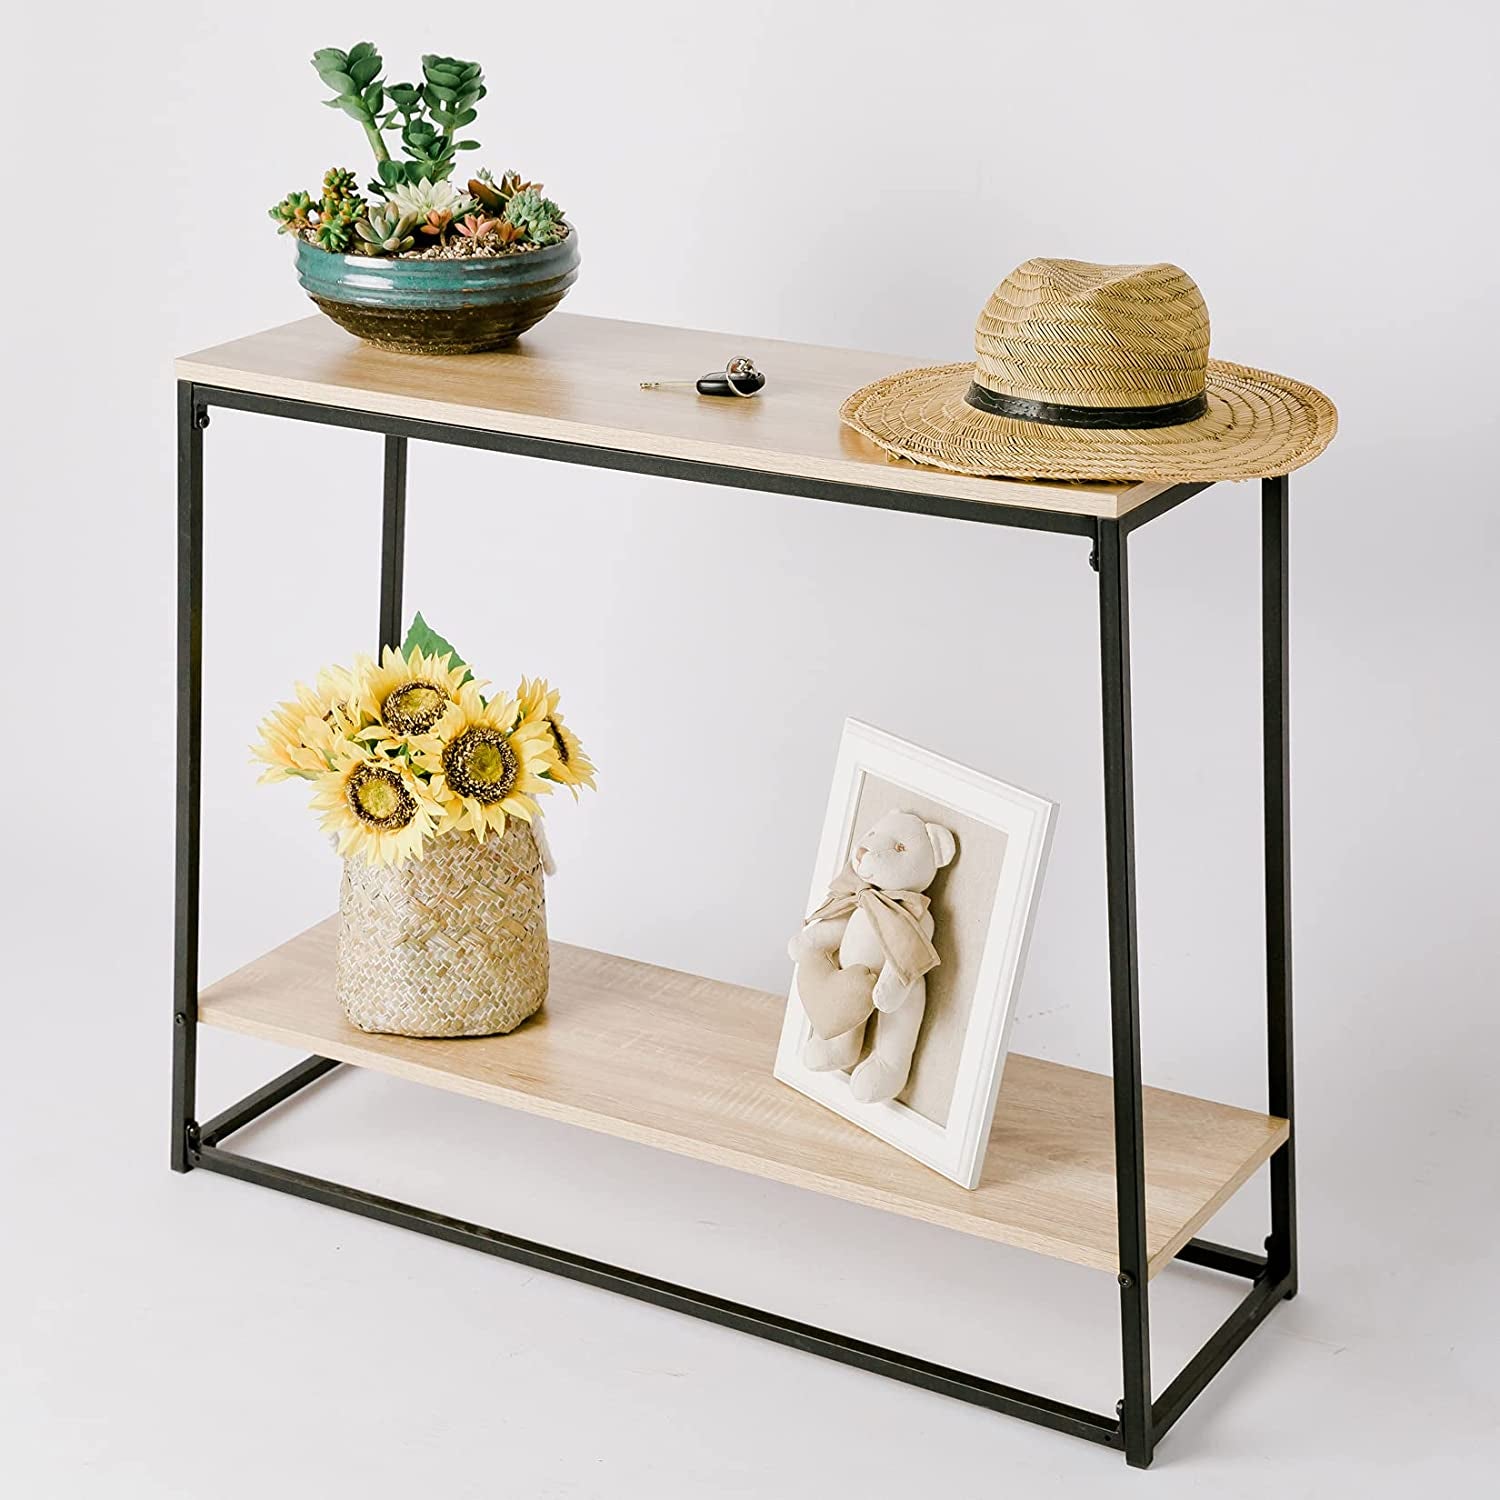 2 Shelf Console Table for Narrow Entry, Hallway or Sofa with Black Metal Frame